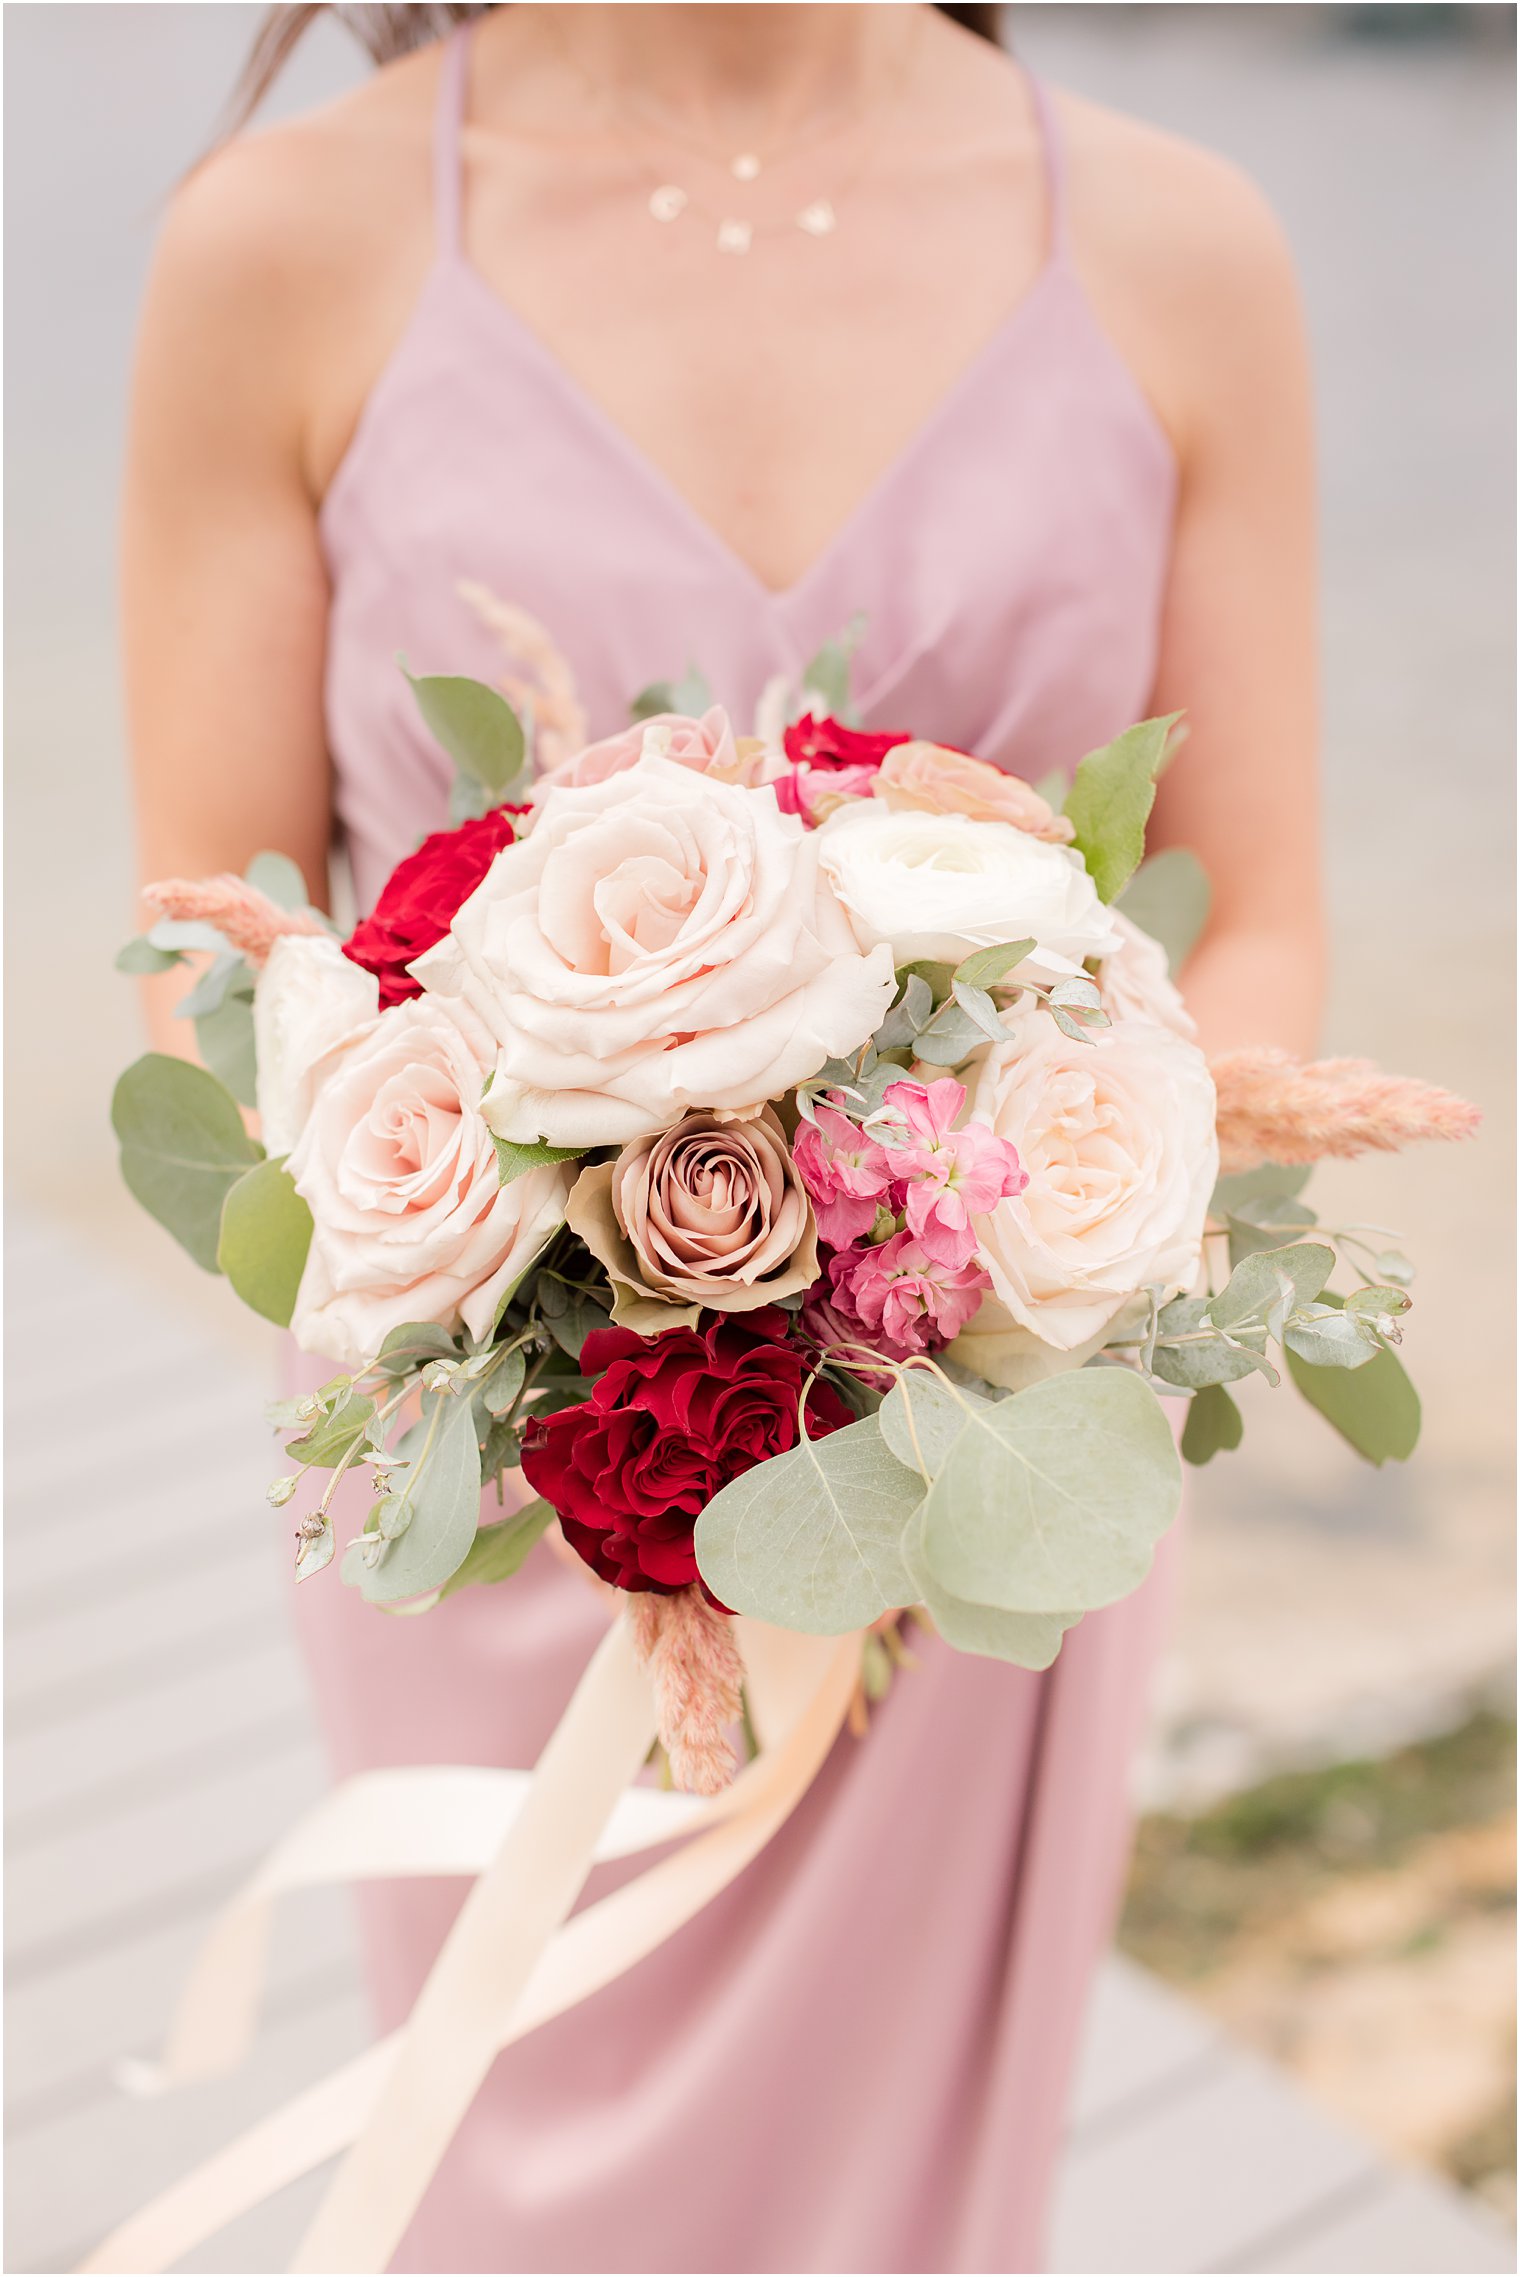 Bridesmaid bouquet by Narcissus Florals in Toms River, NJ 